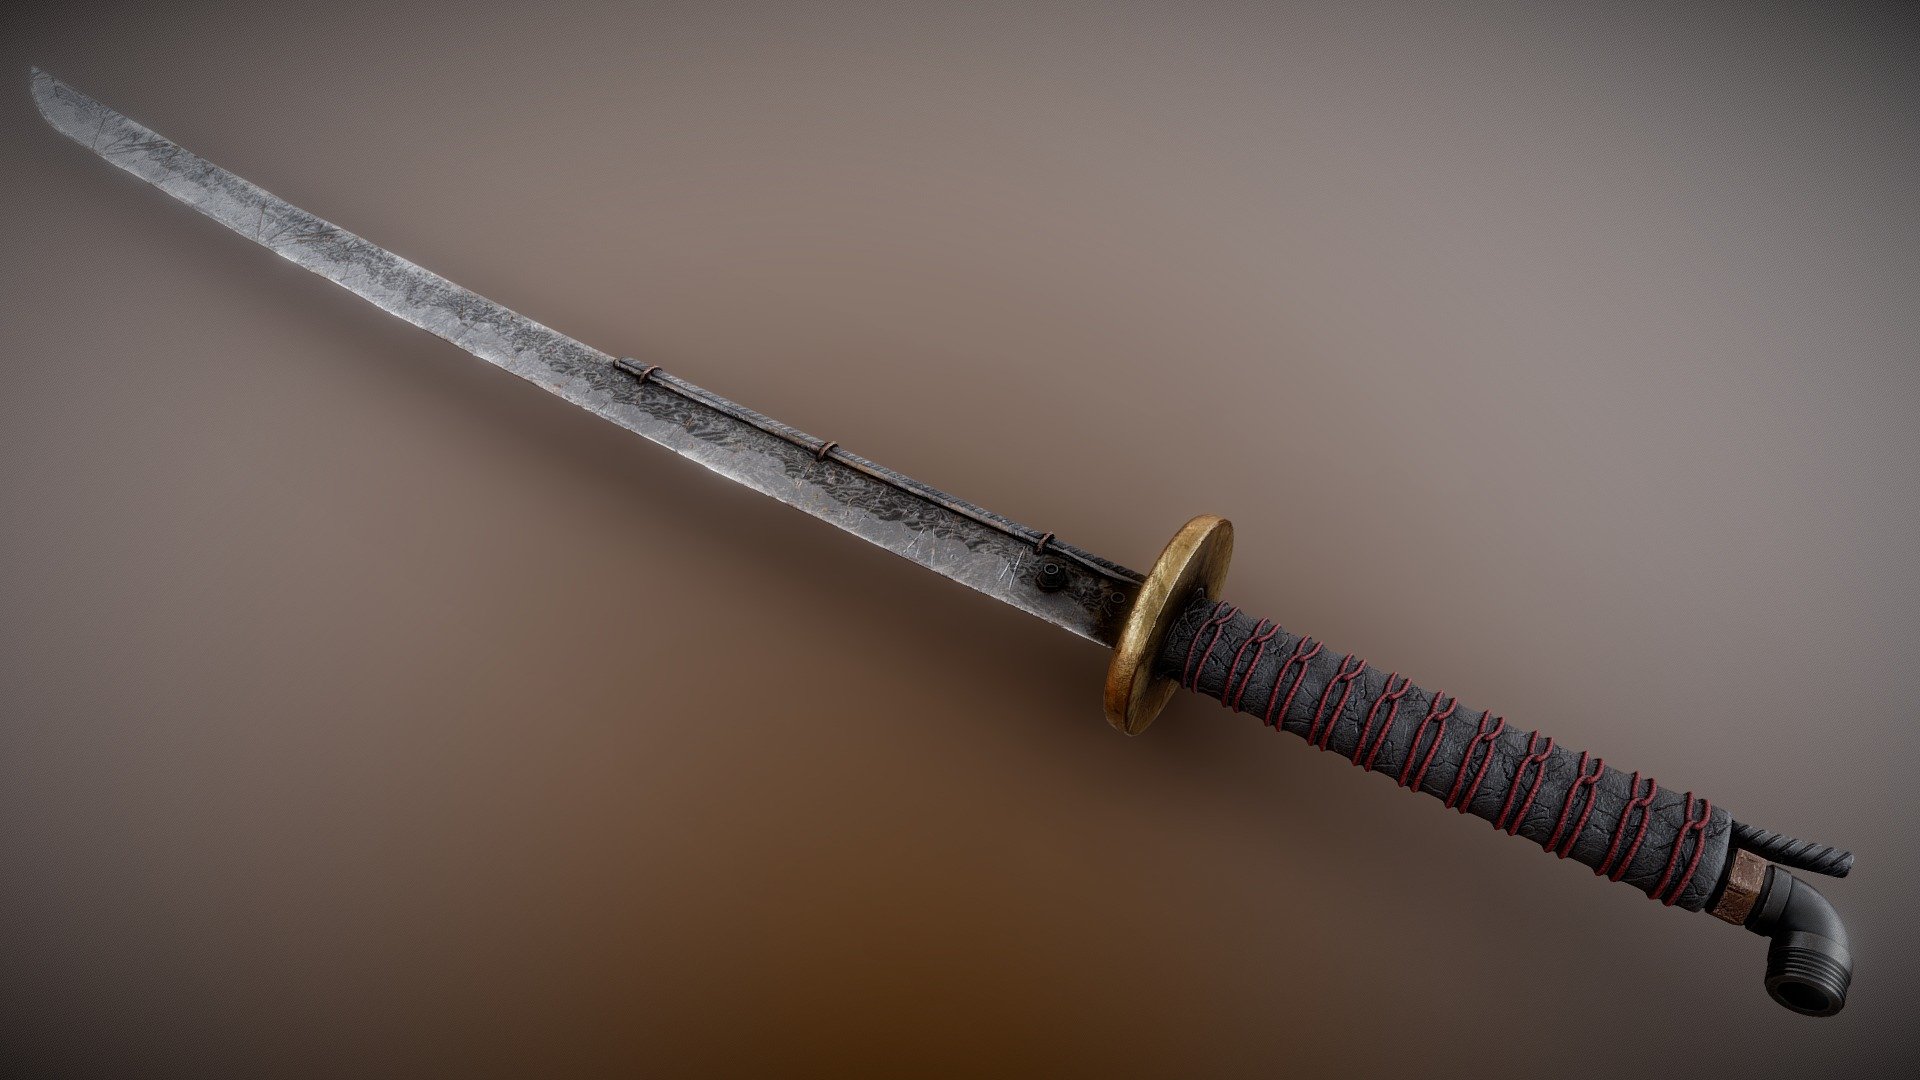 It's a Dirty Katana! From Dying Light 2.
Will be turned into a mod for the VR game Blade &amp; Sorcery 3d model